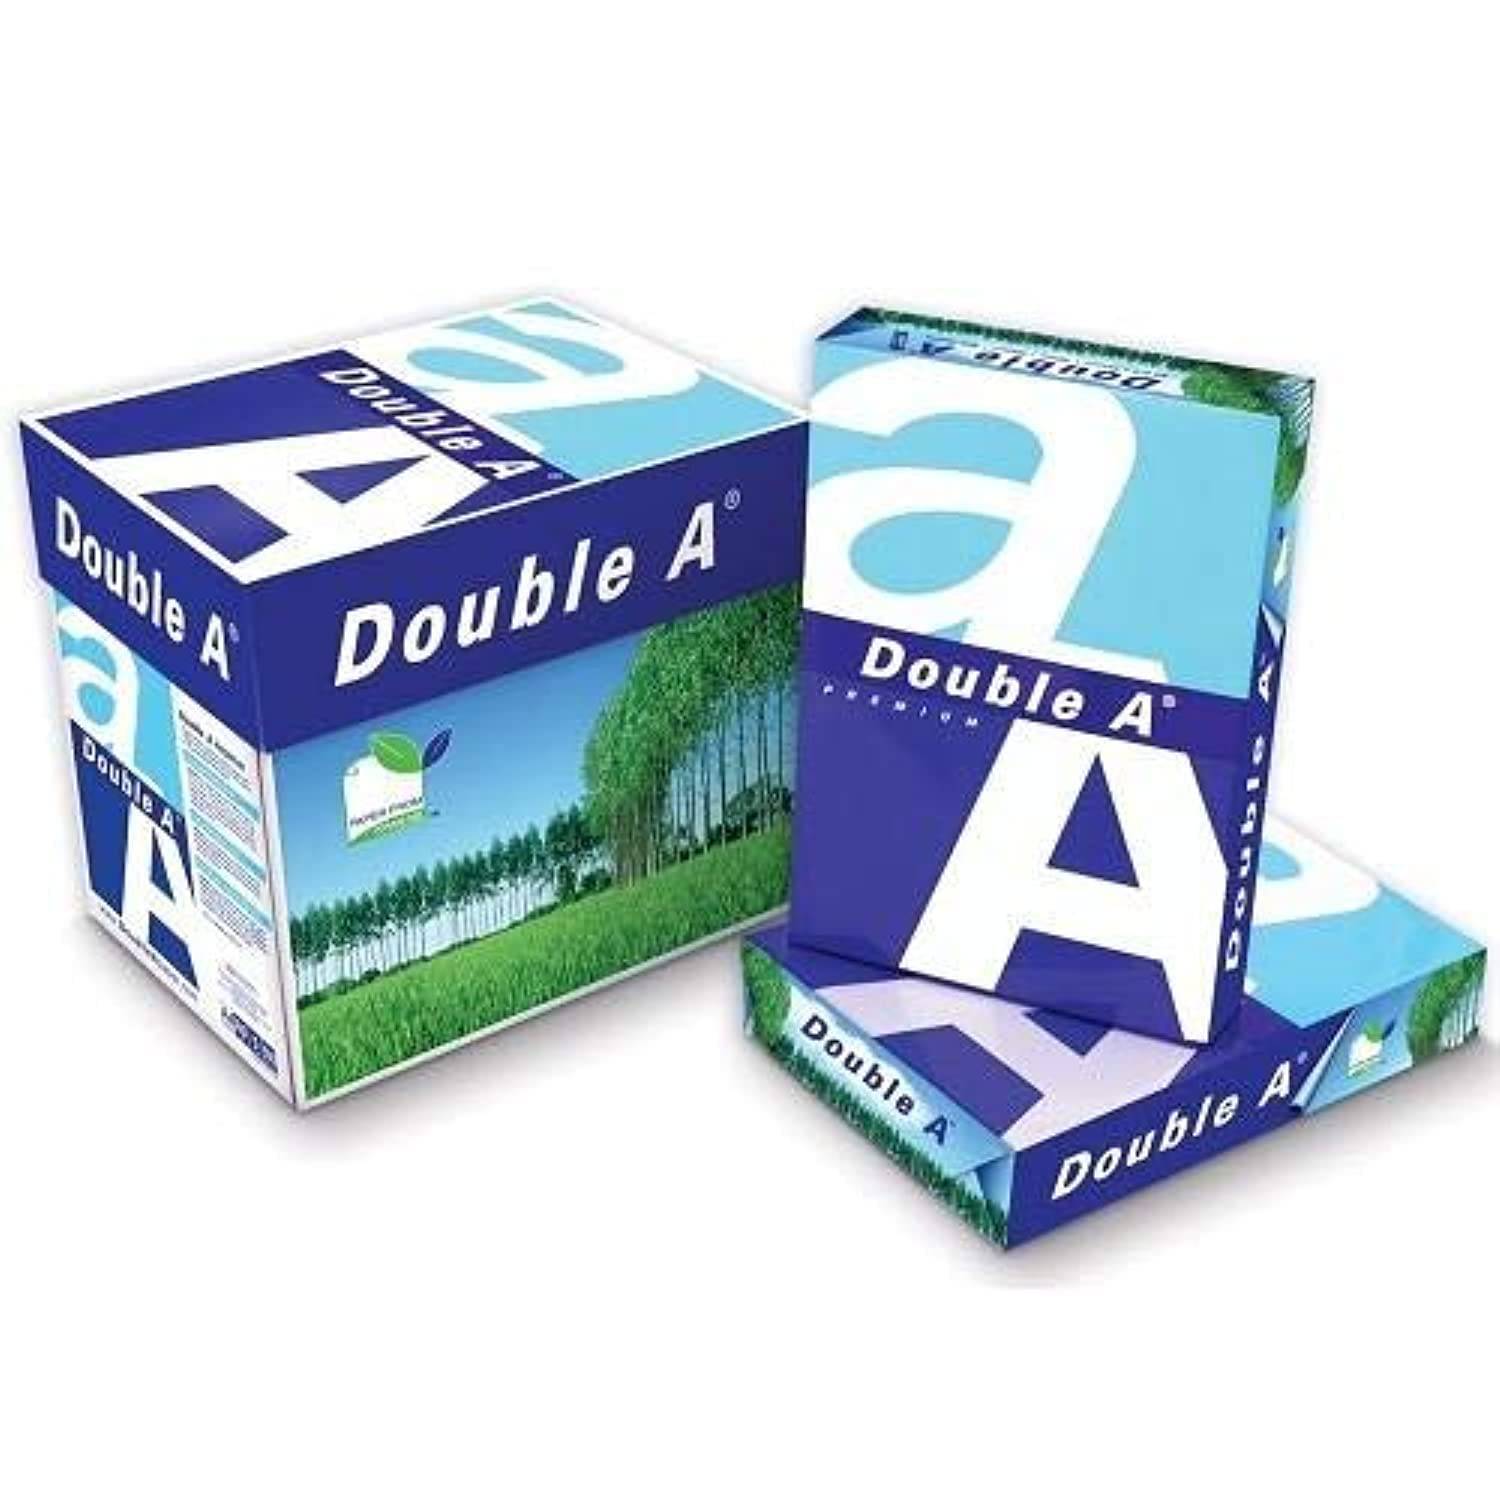 Double A Printing Paper A4 - 500 Sheets - 80GSM- Dimensions 8.3" x 11.7" - White (500 faqe )